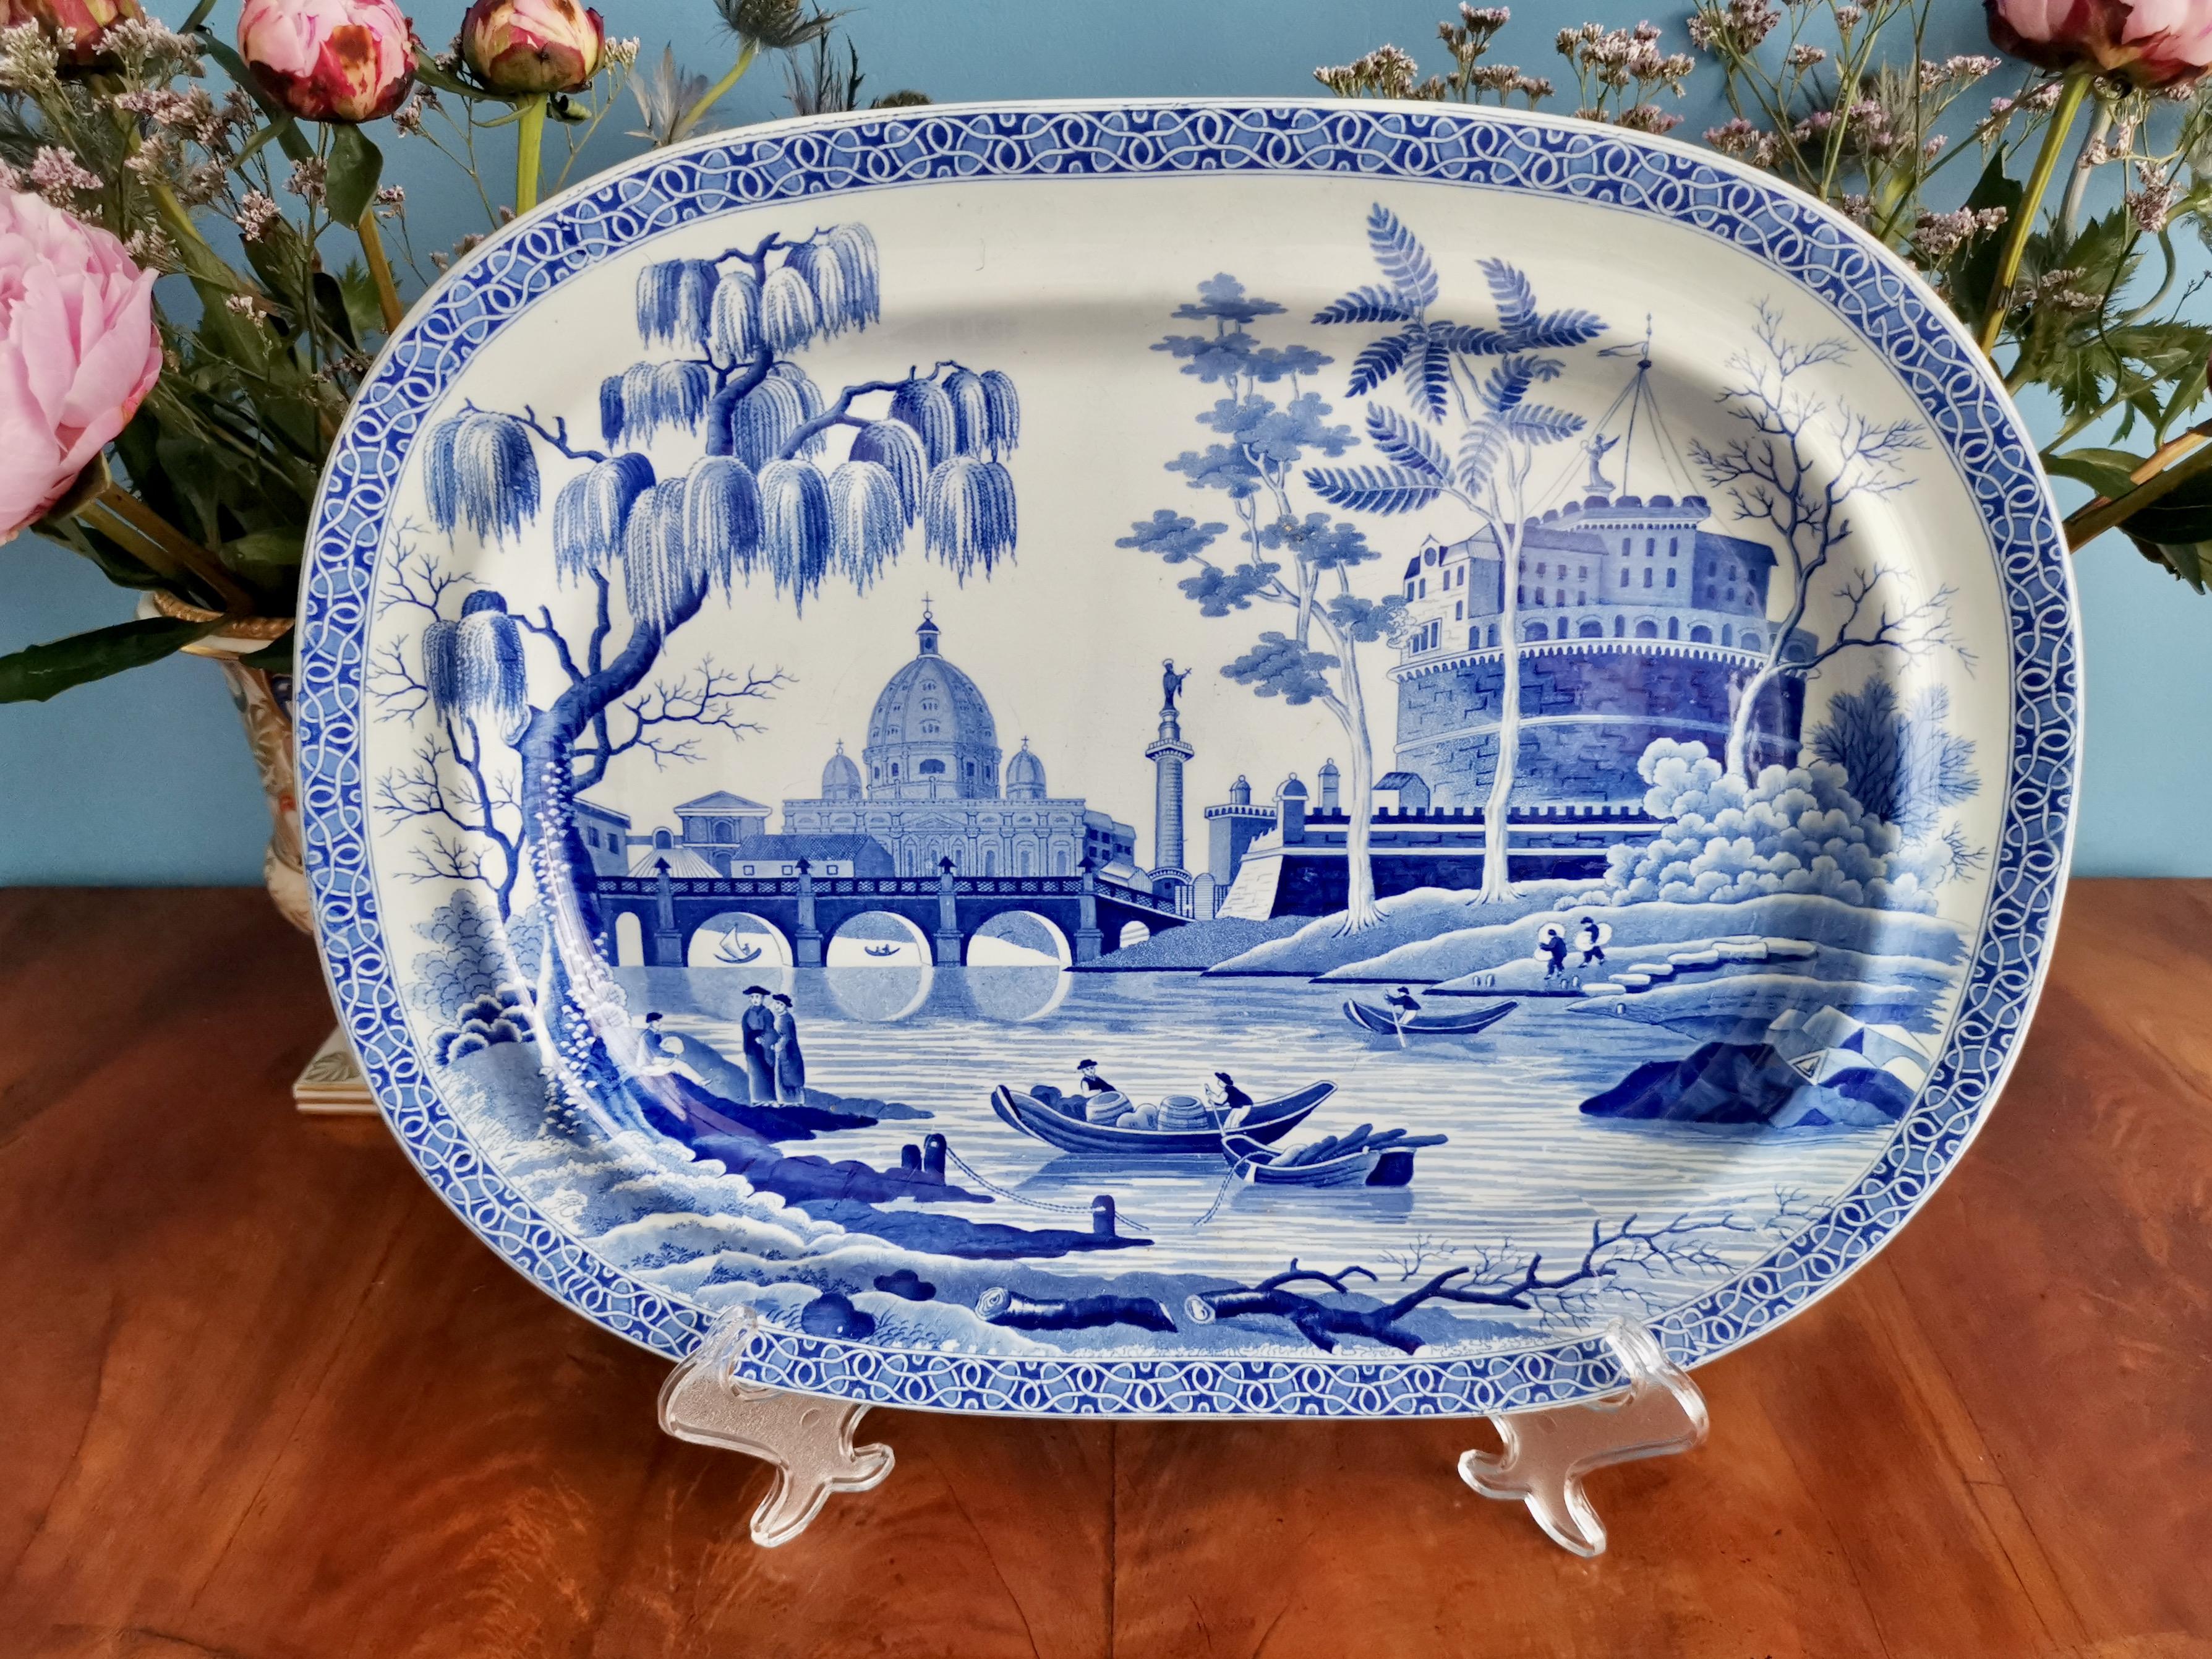 This is a beautiful meat platter made by Spode between 1811 and 1833. The platter is made of pearlware and in immaculate condition. It is decorated with a superbly executed blue and white 